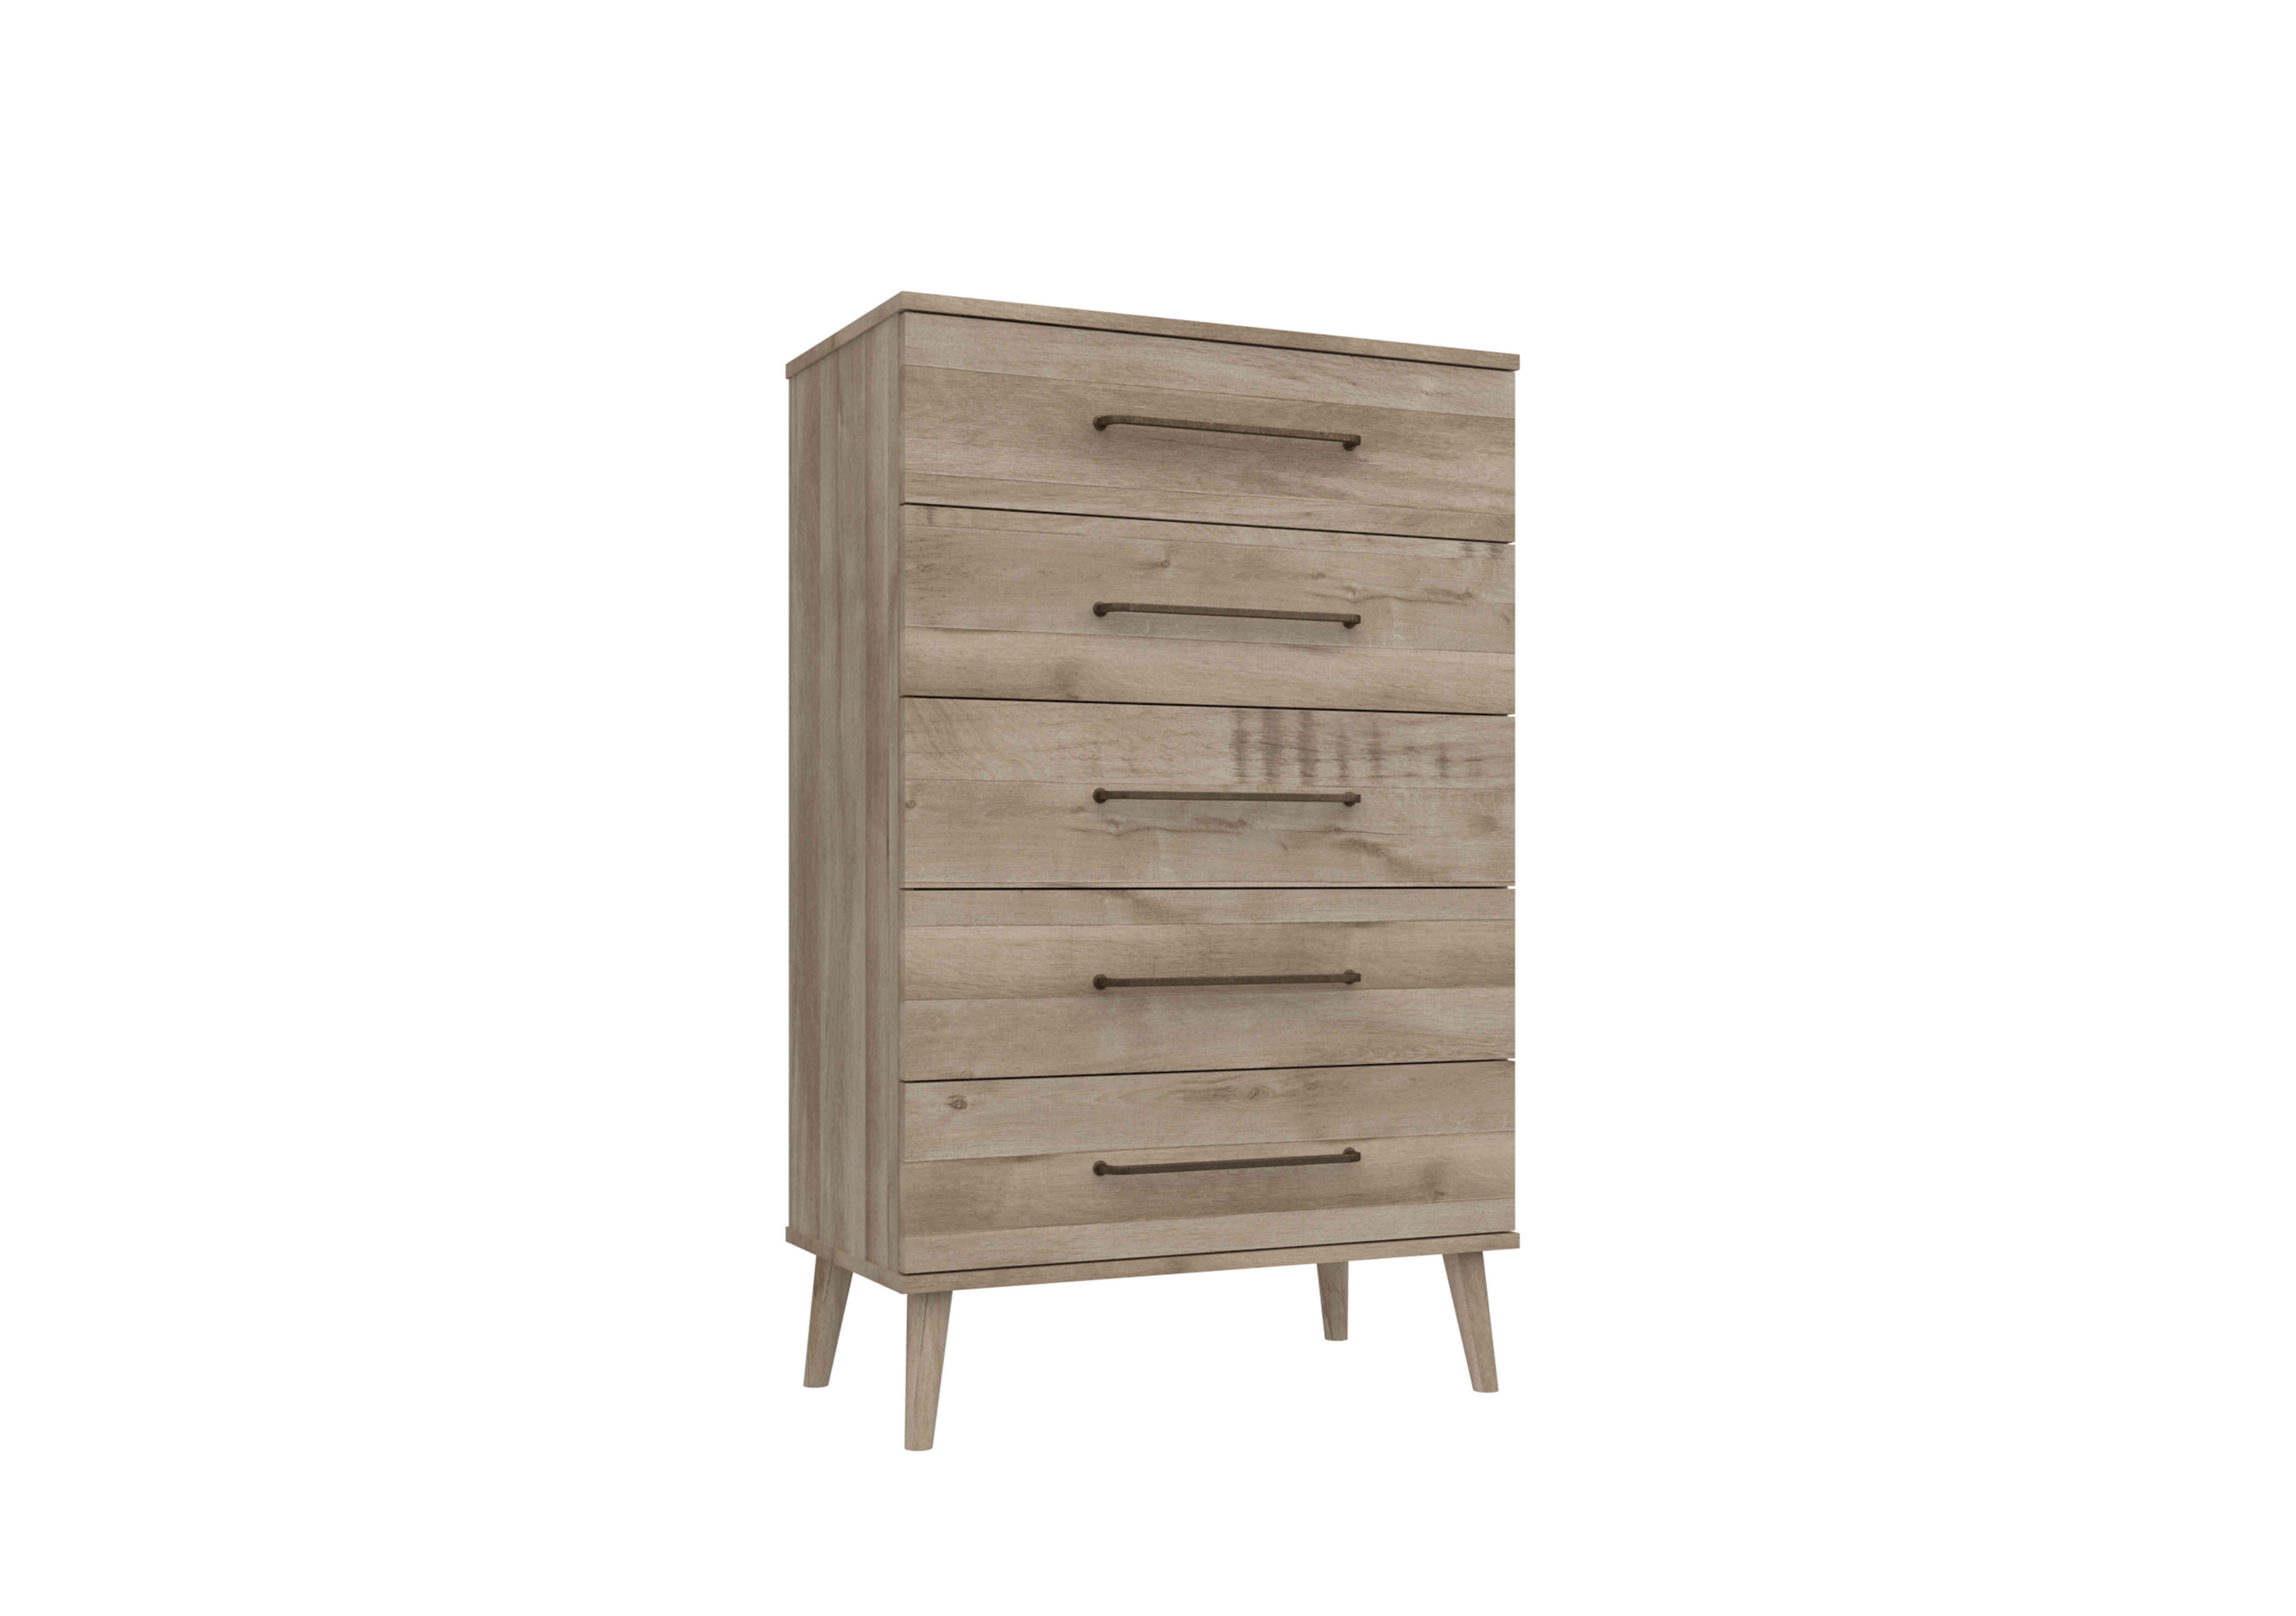 Finchley 5 Drawer Chest in Italian Natural Oak on Furniture Village